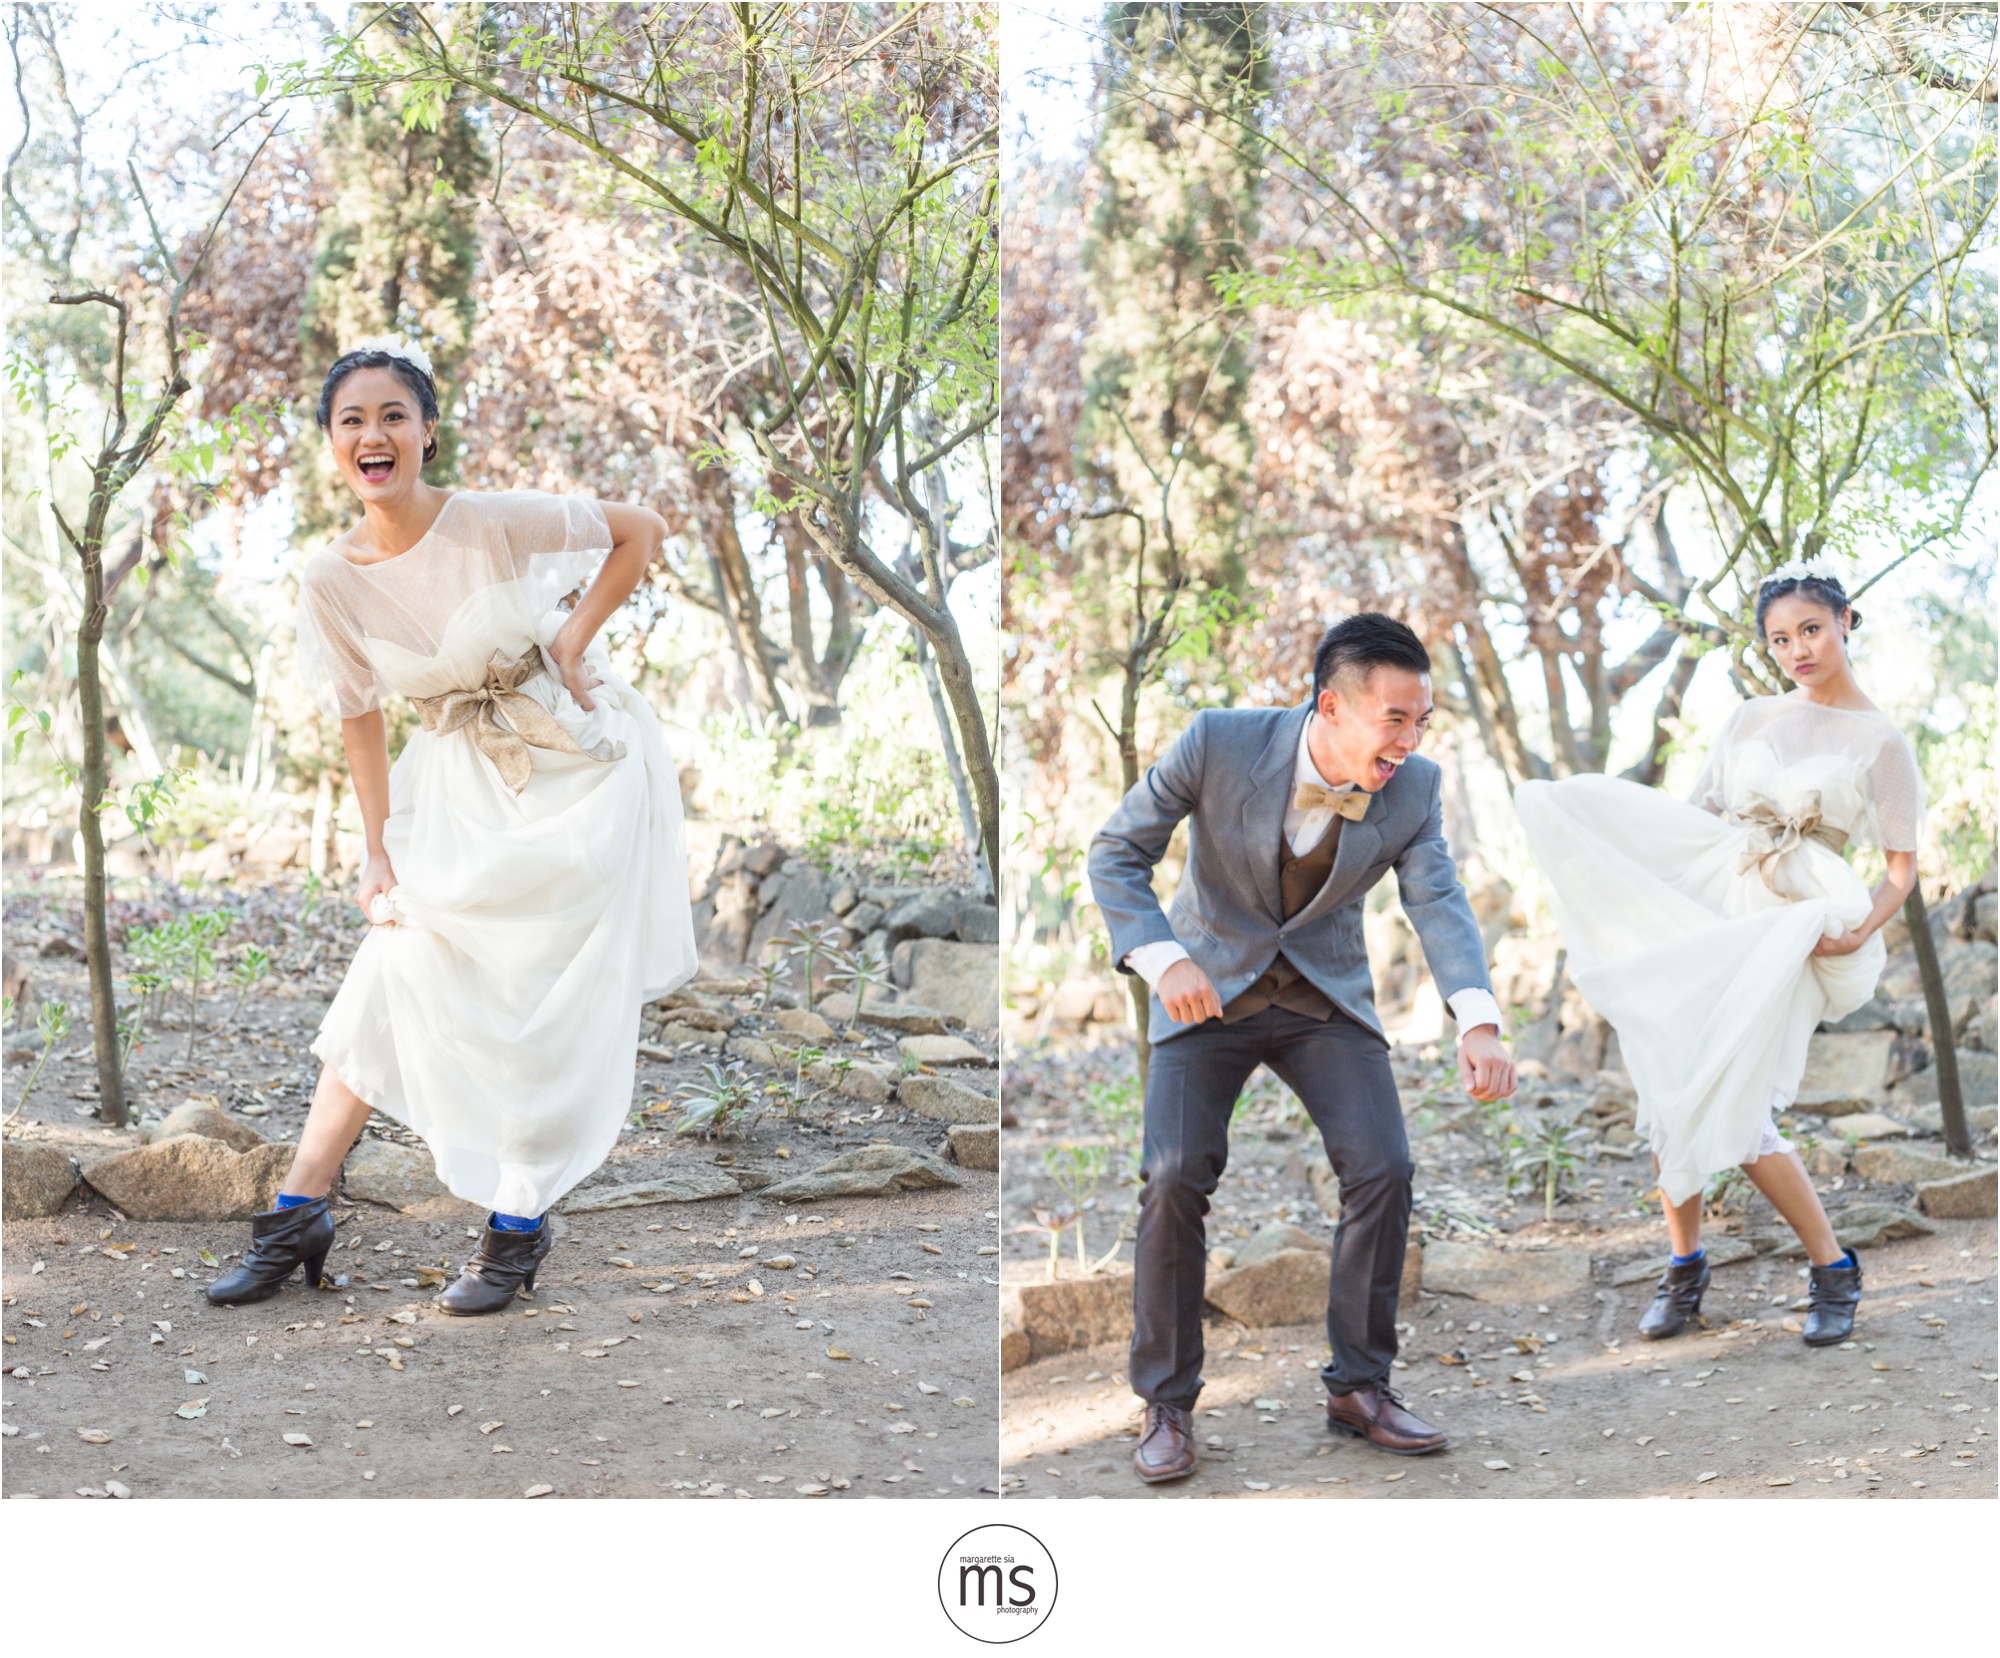 margarette sia photography first wedding_0029